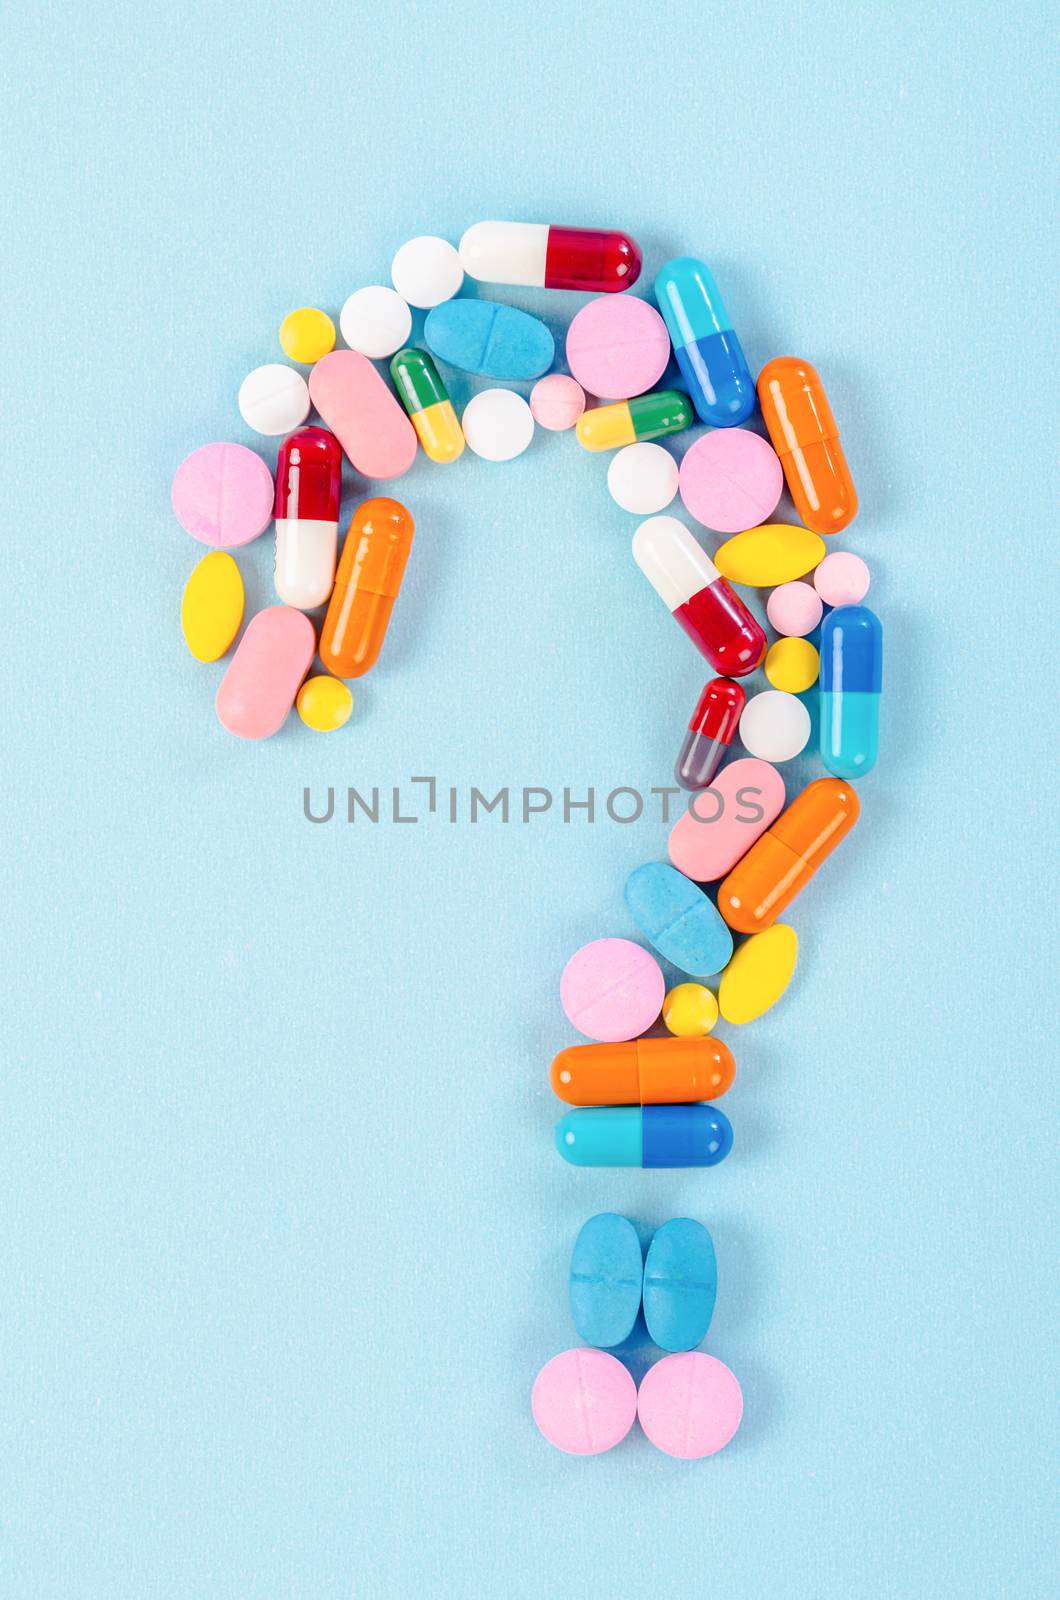 A question mark from laid out of medicine pills on blue background.